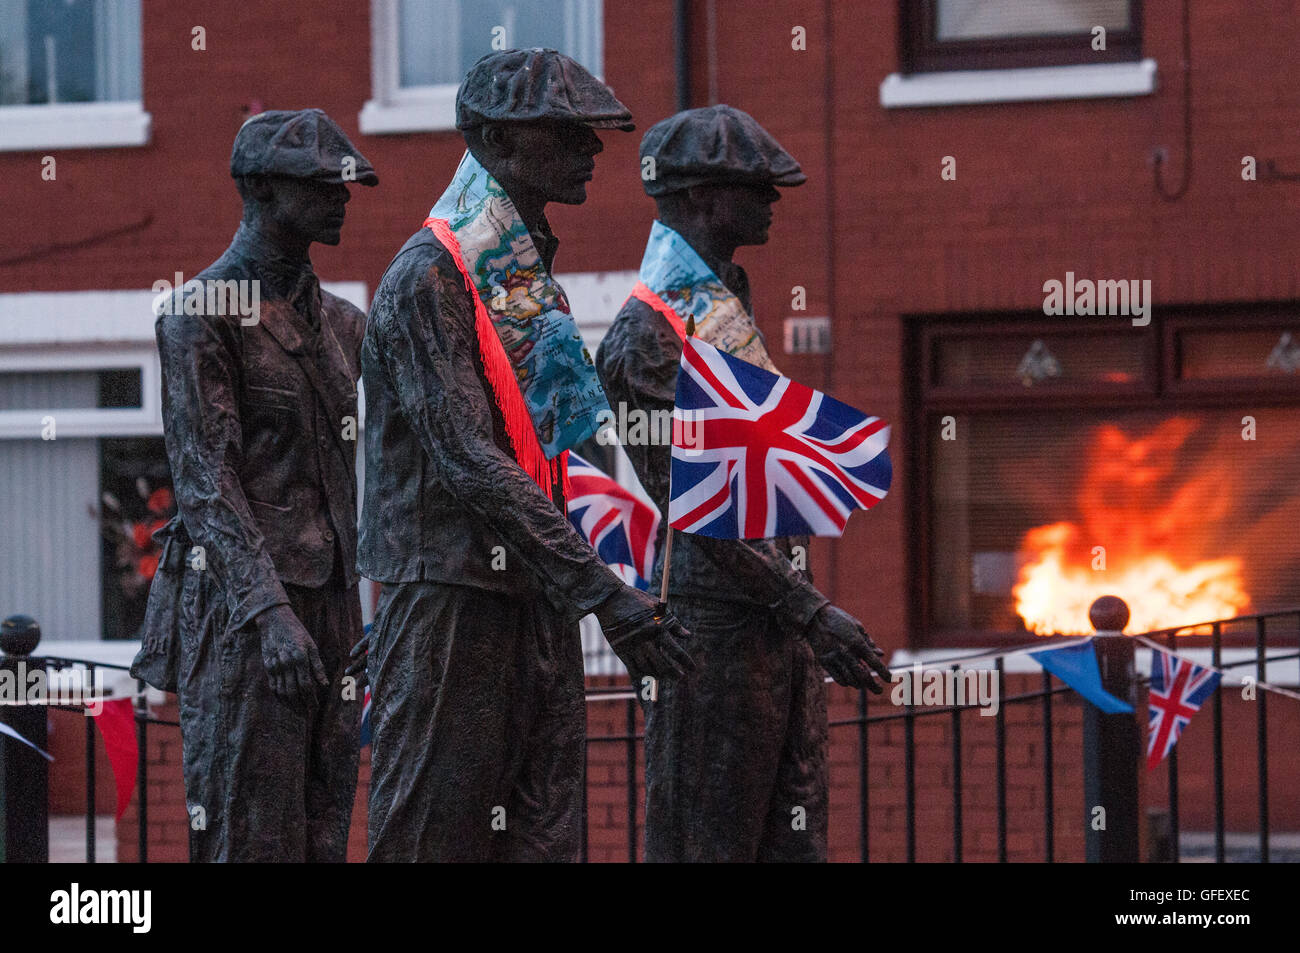 Belfast, Northern Ireland. 11 Jul 2016 - The reflection of a bonfire in a window behind a public art display remembering the shipyard workers of Belfast, which has been decorated with Orange 'Sashes' or collarettes and Union Flags in readiness for the 12th July celebrations Stock Photo